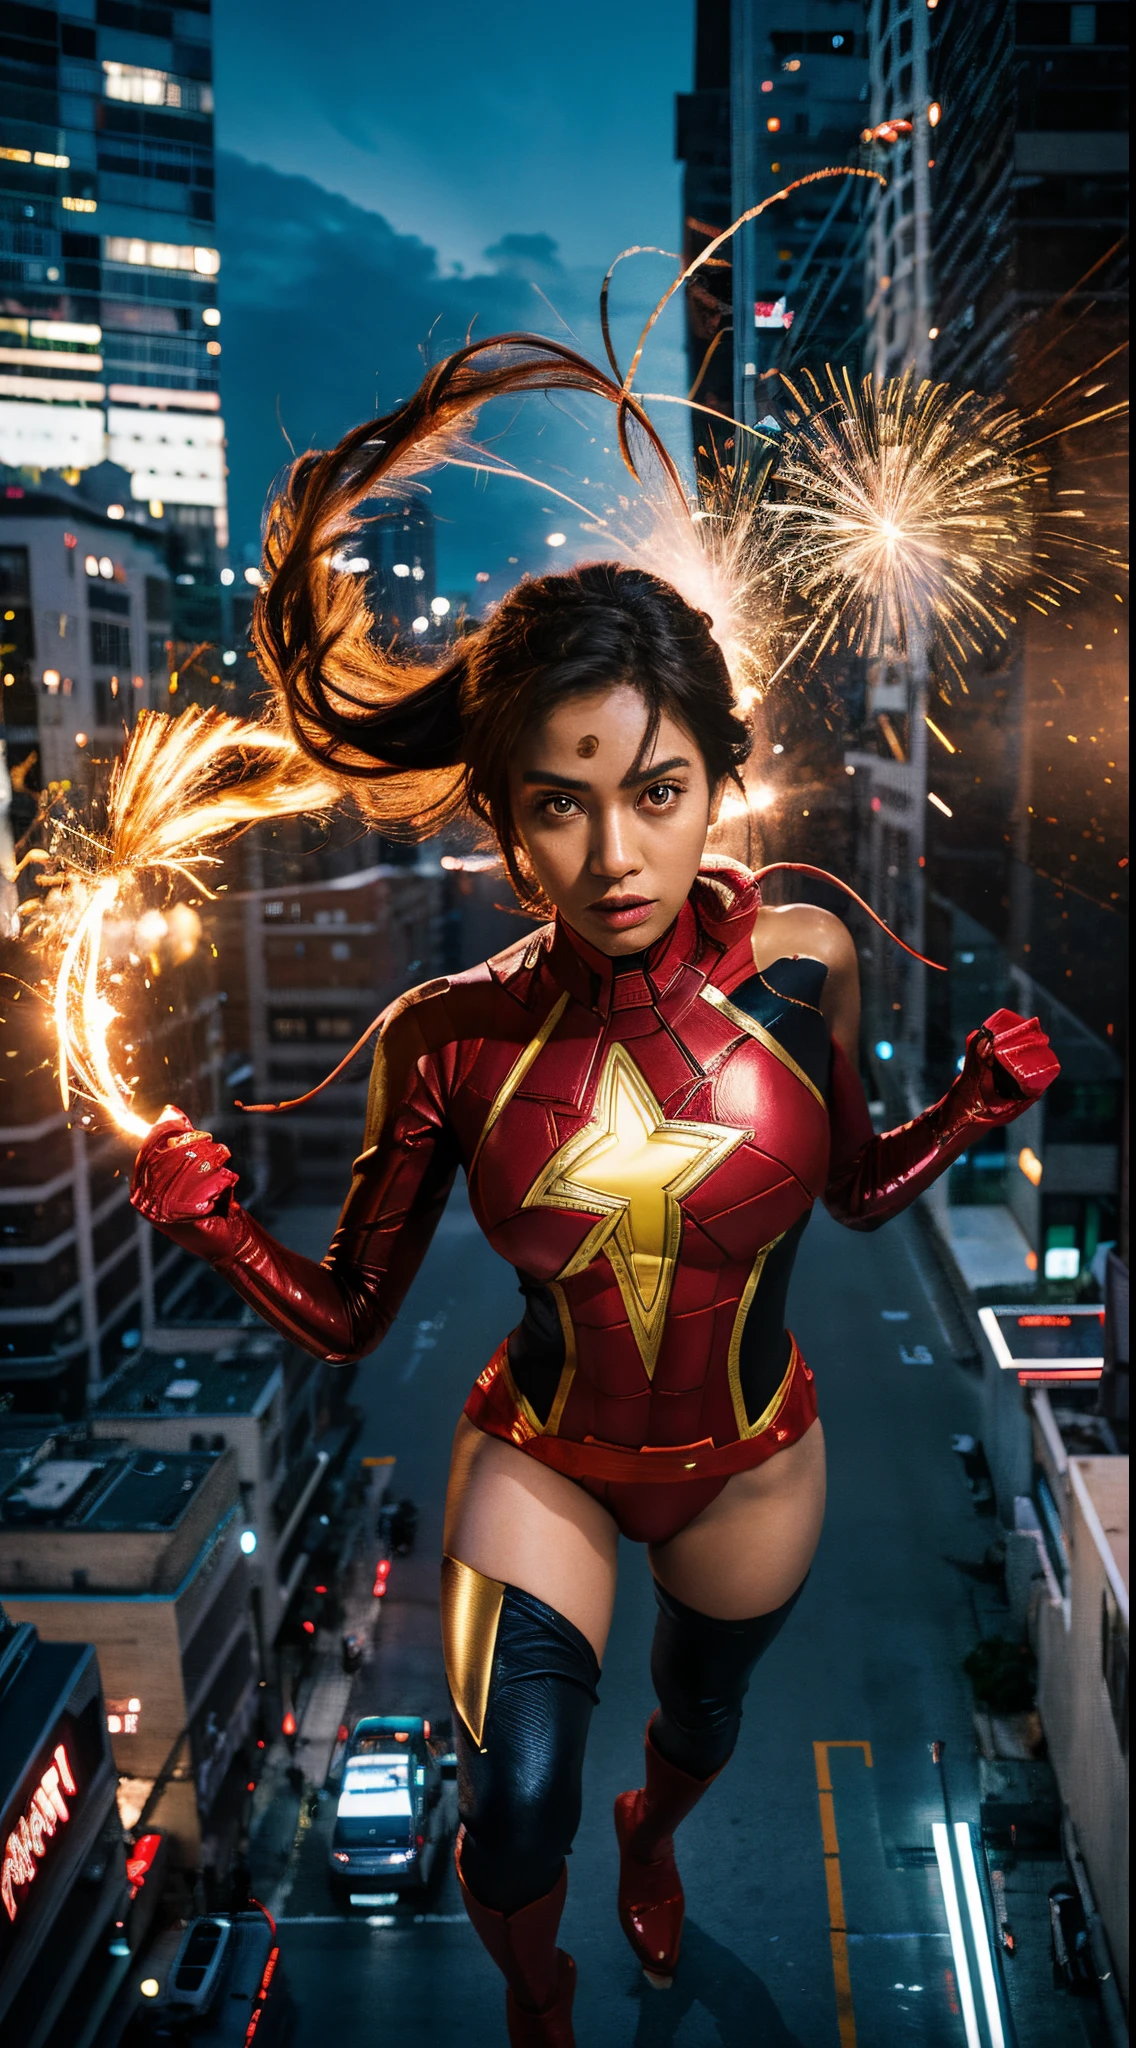 Create a dynamic and action-packed photomanipulation reminiscent of Marvel superhero movies. Feature the Malay girl in hijab showcasing her unique superpowers in a cityscape, surrounded by vivid colors and high-energy effects